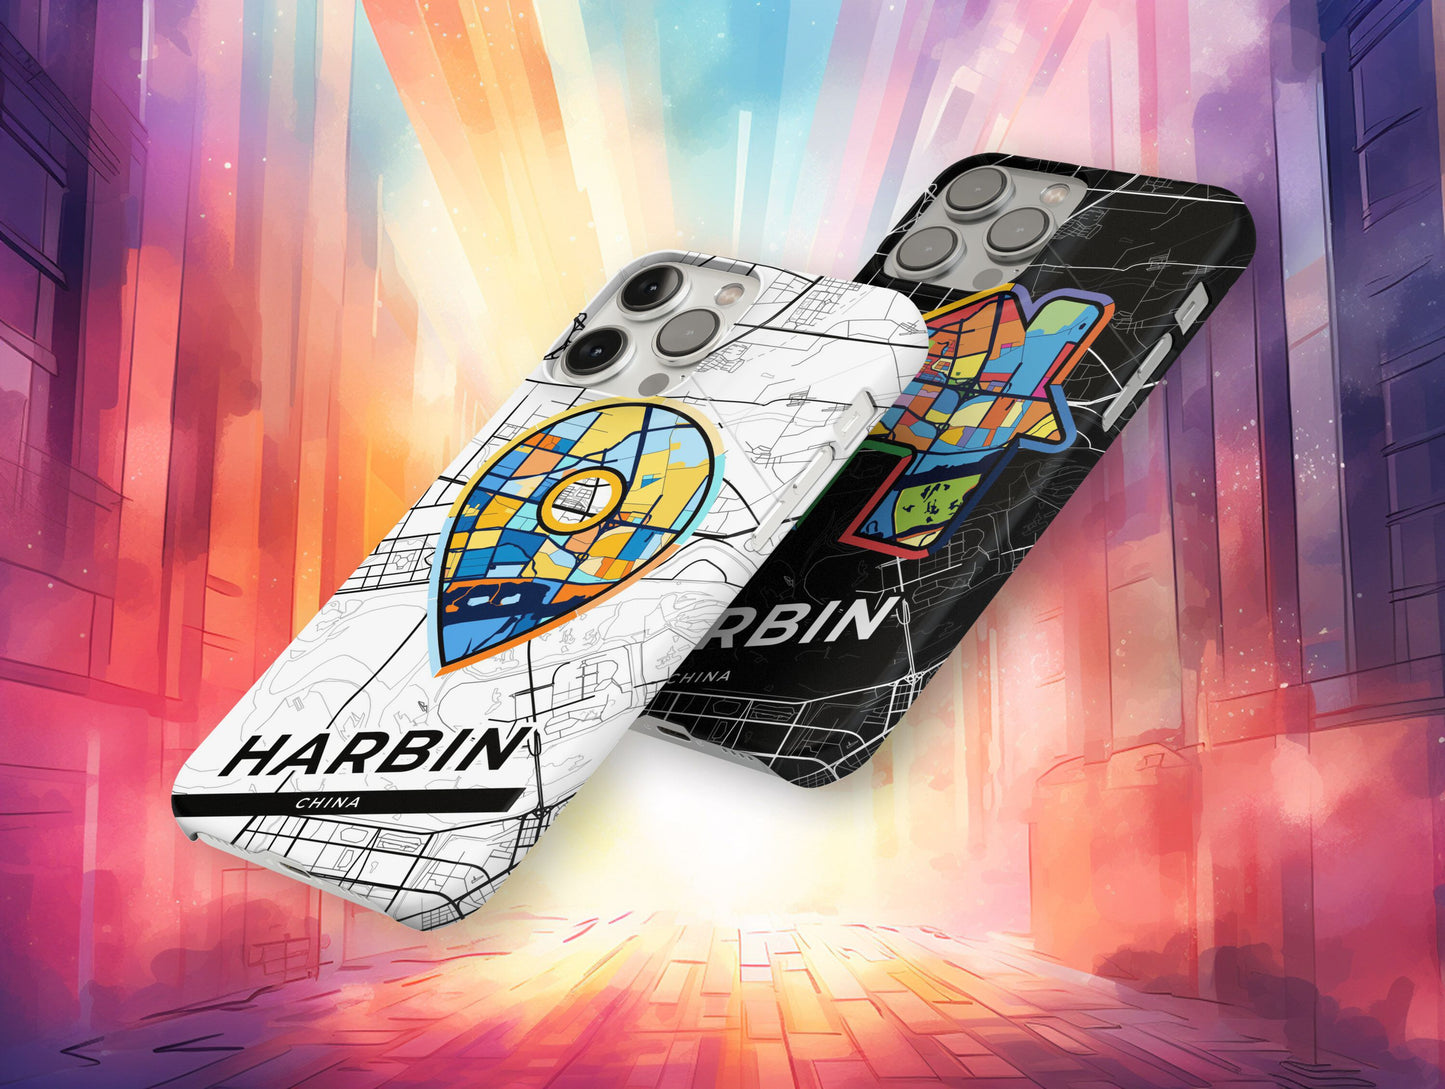 Harbin China slim phone case with colorful icon. Birthday, wedding or housewarming gift. Couple match cases.